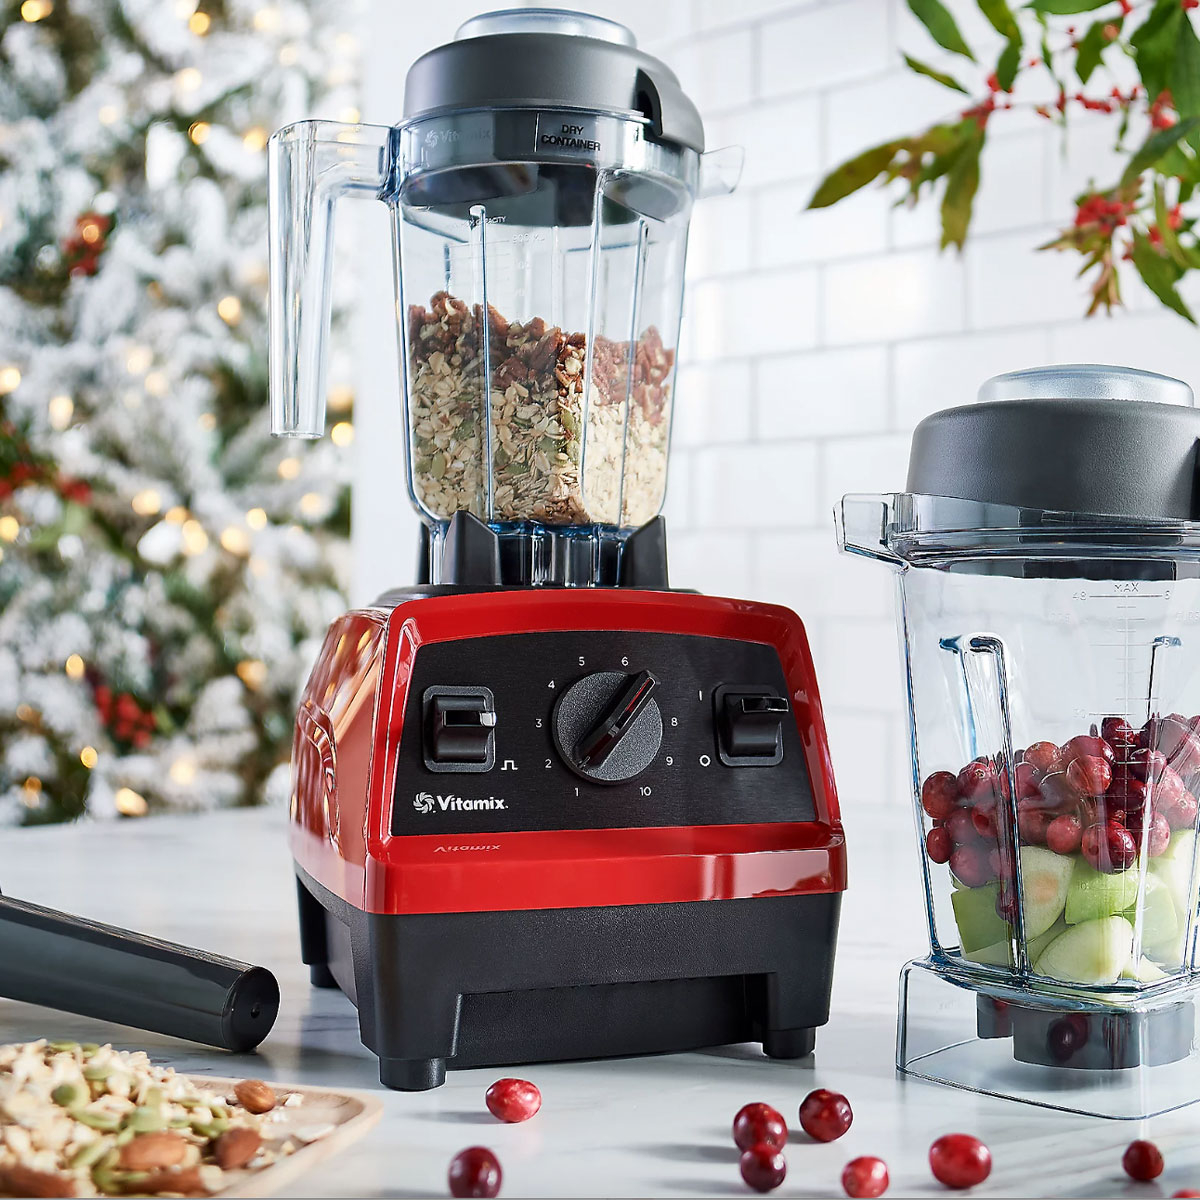 This Buying Hack Will Help You Save up to $120 on a Vitamix Blender